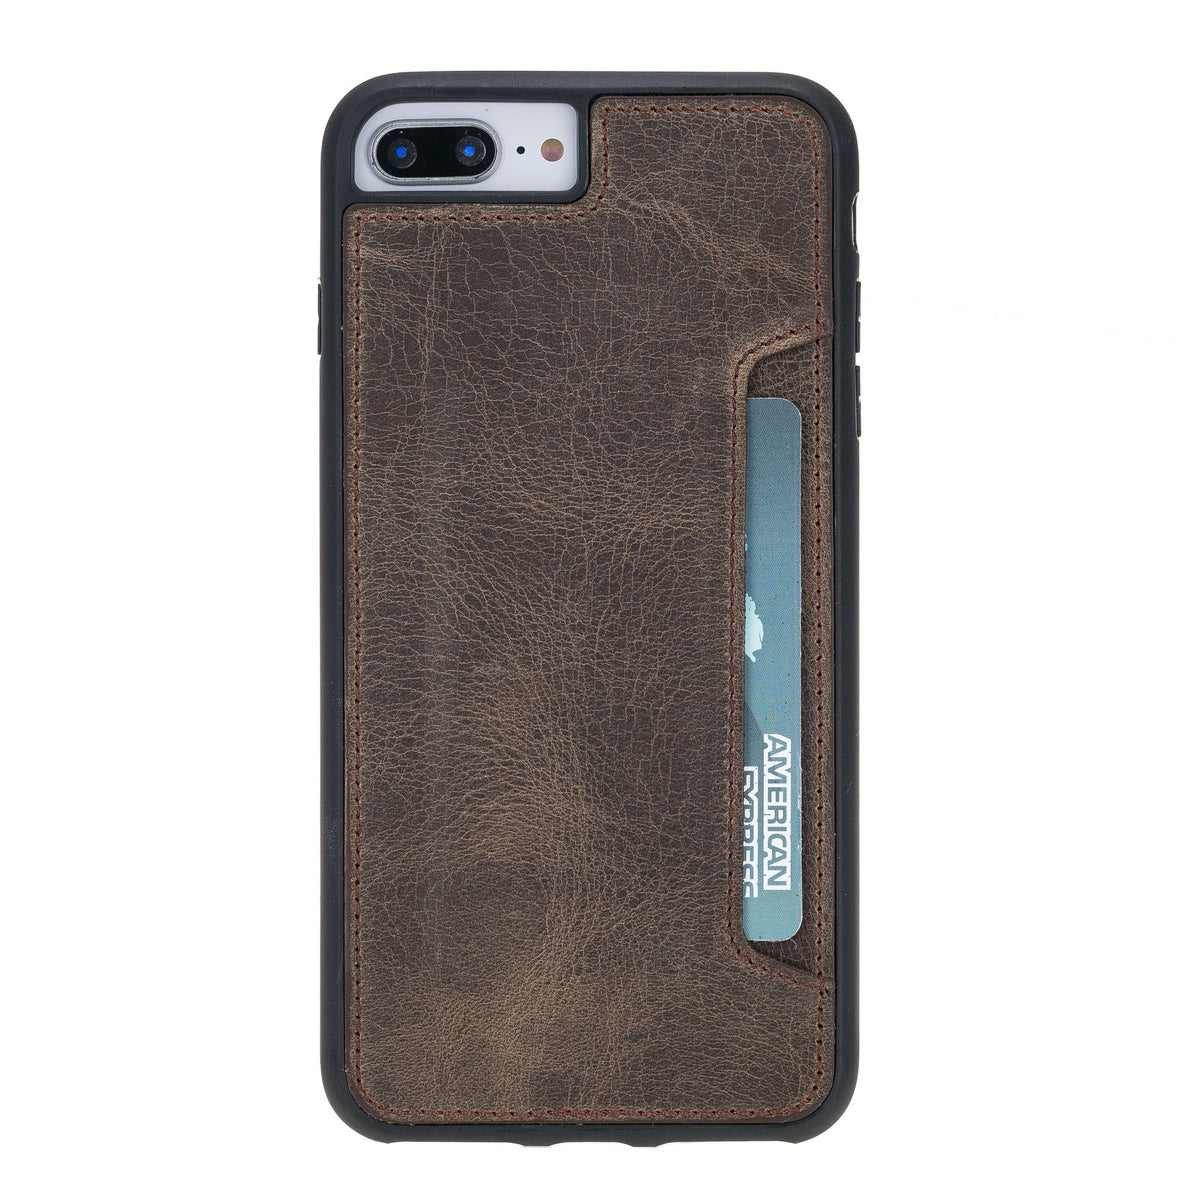 Apple iPhone 7-8 Series Leather Card Holder Back Cover